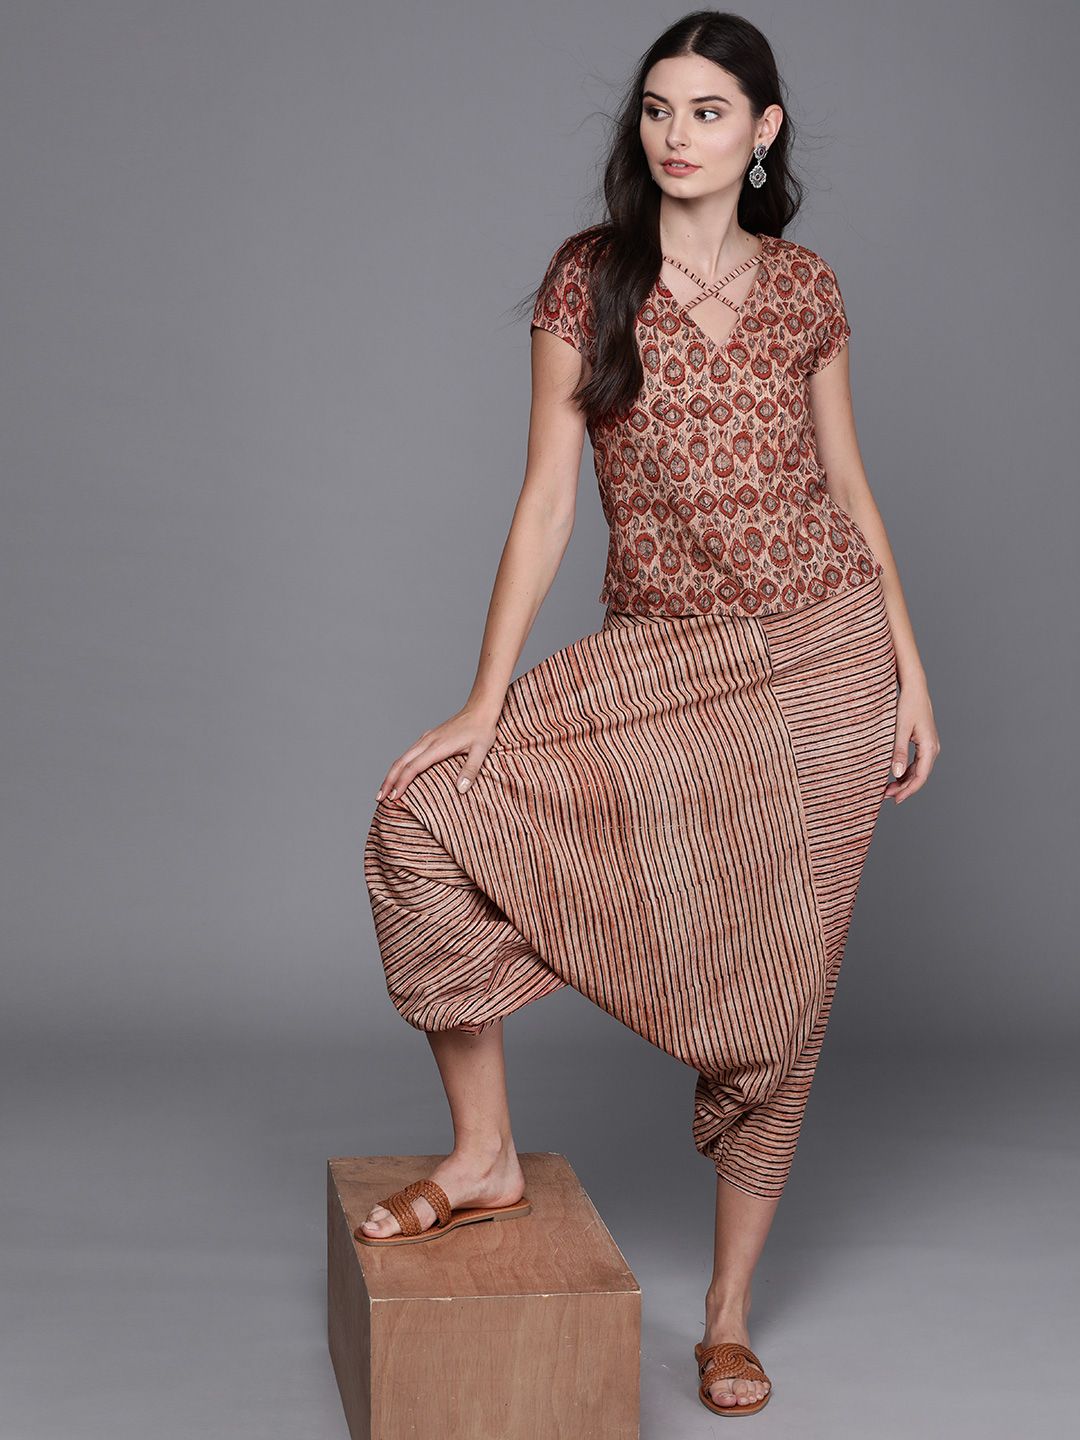 Buy Fabindia Fabindia Beige Cotton Relaxed Fit Trousers at Redfynd